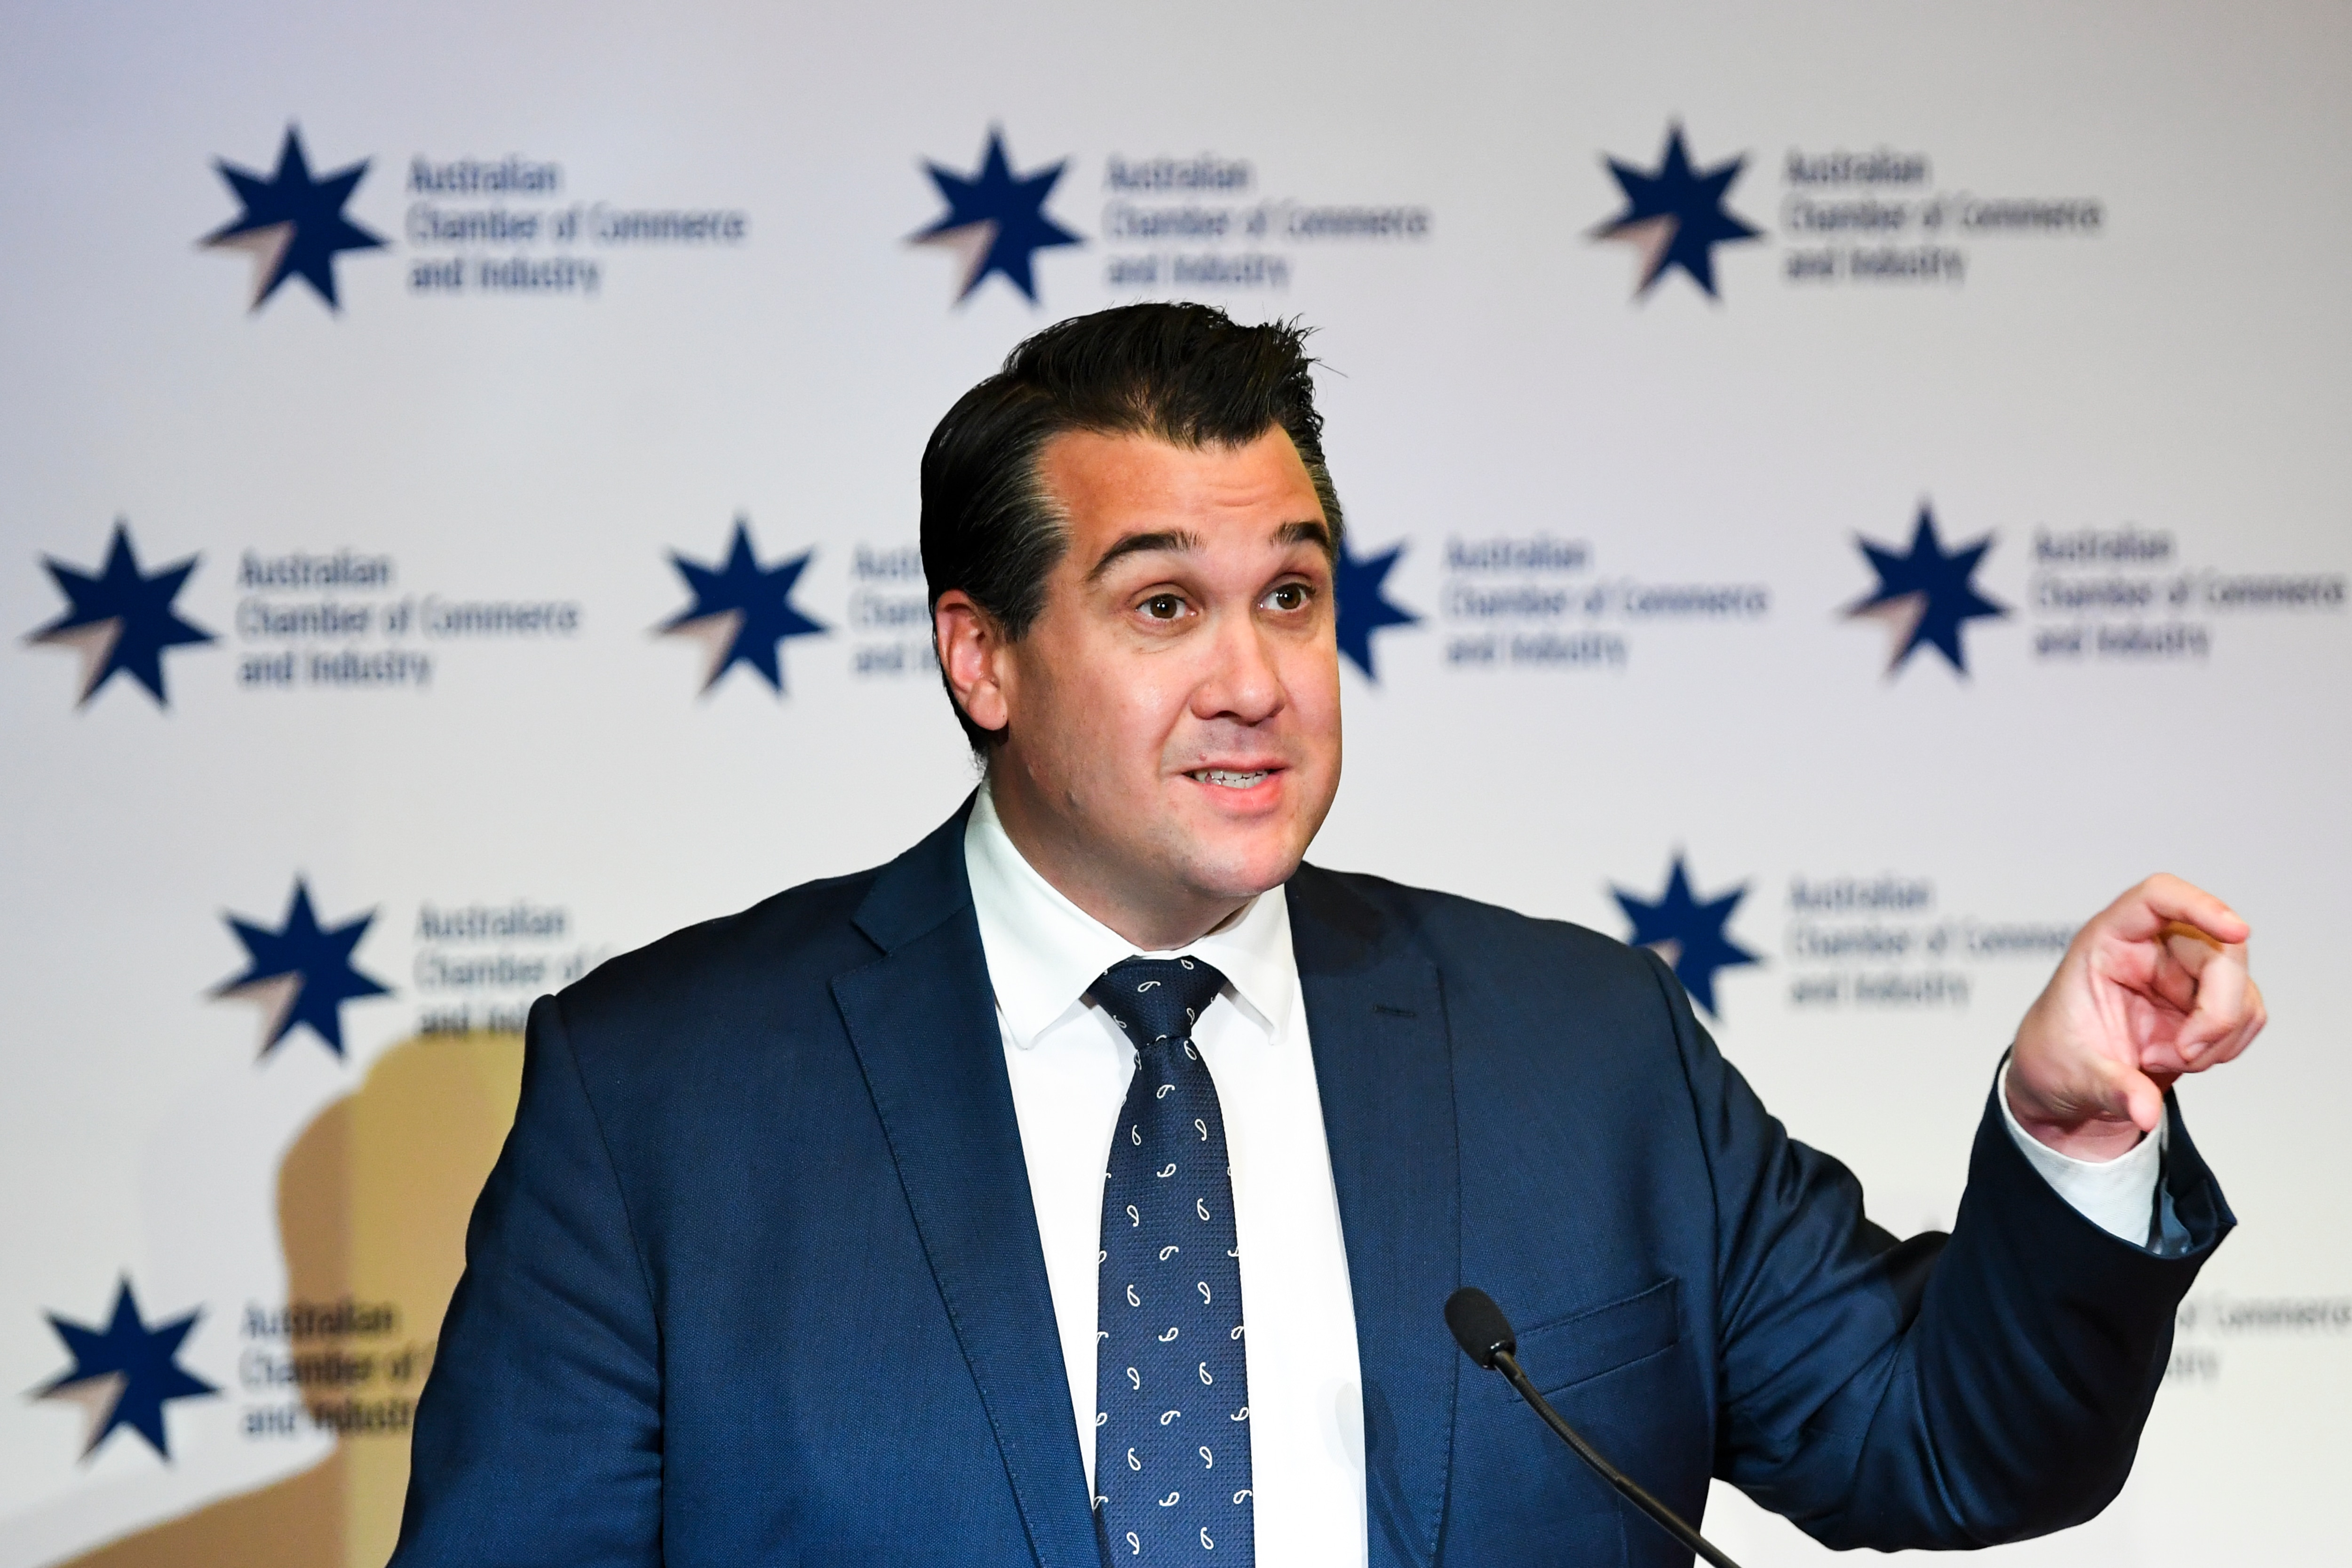 Australian Assistant Treasurer Michael Sukkar delivers a speech to the Australian Chamber of Commerce and Industry (ACCI) at Parliament House in Canberra, Wednesday, May 12, 2021. (AAP Image/Lukas Coch) NO ARCHIVING